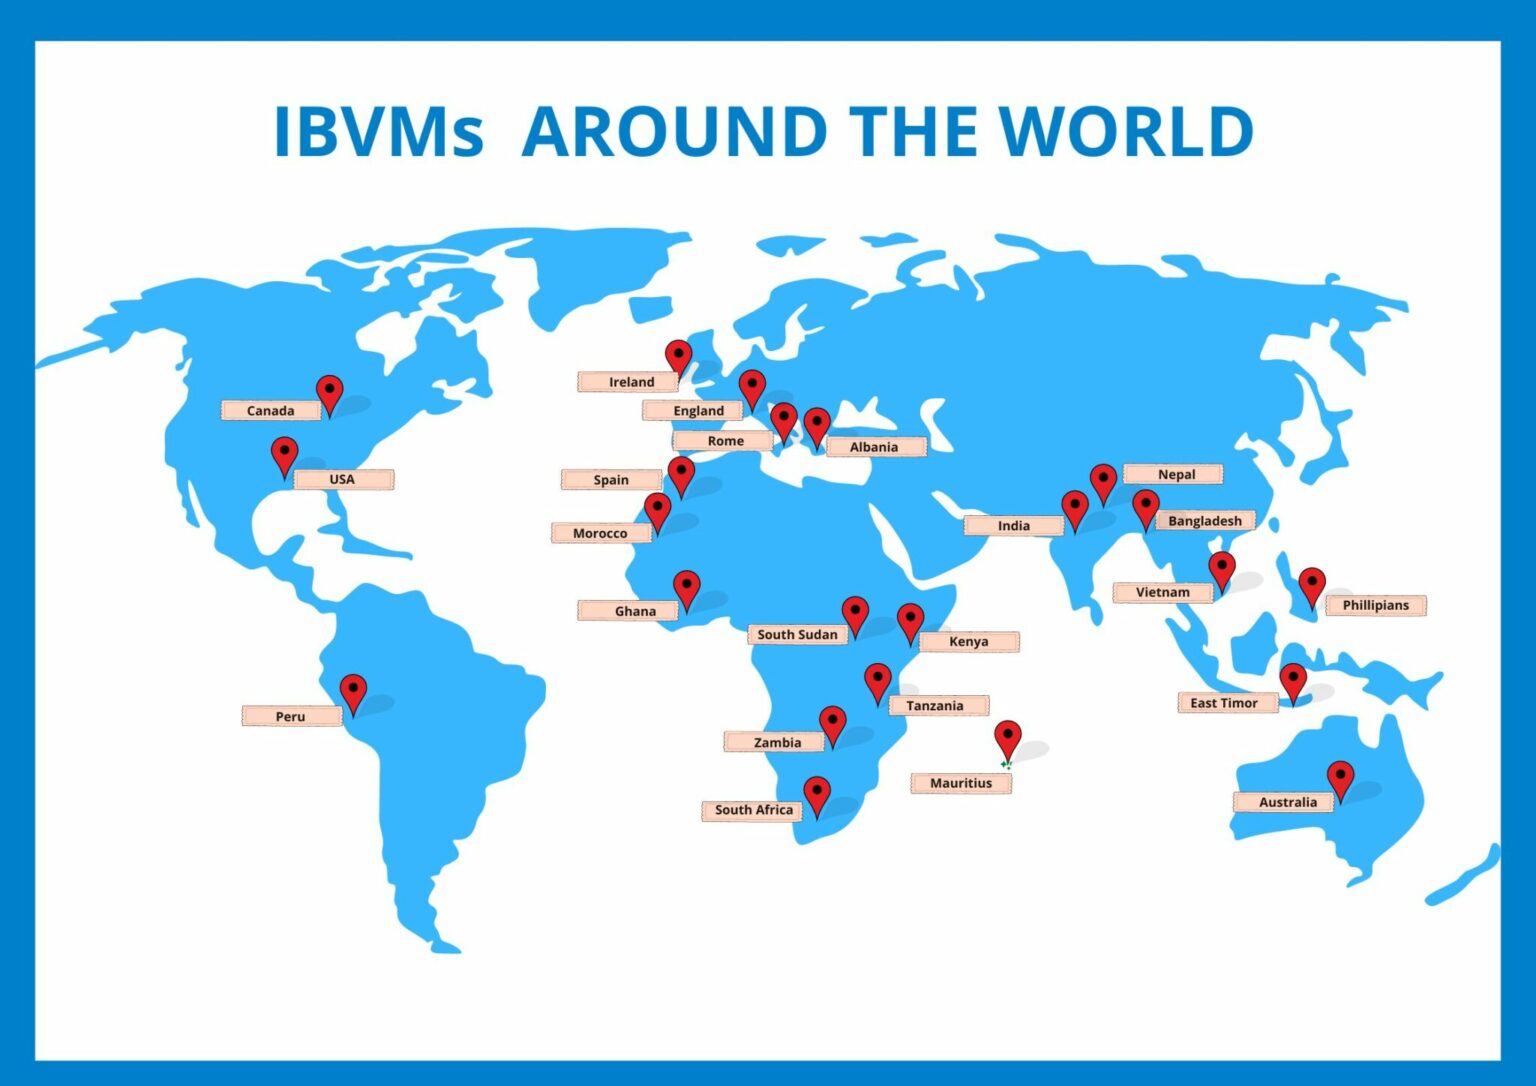 Map of IBVM around the world